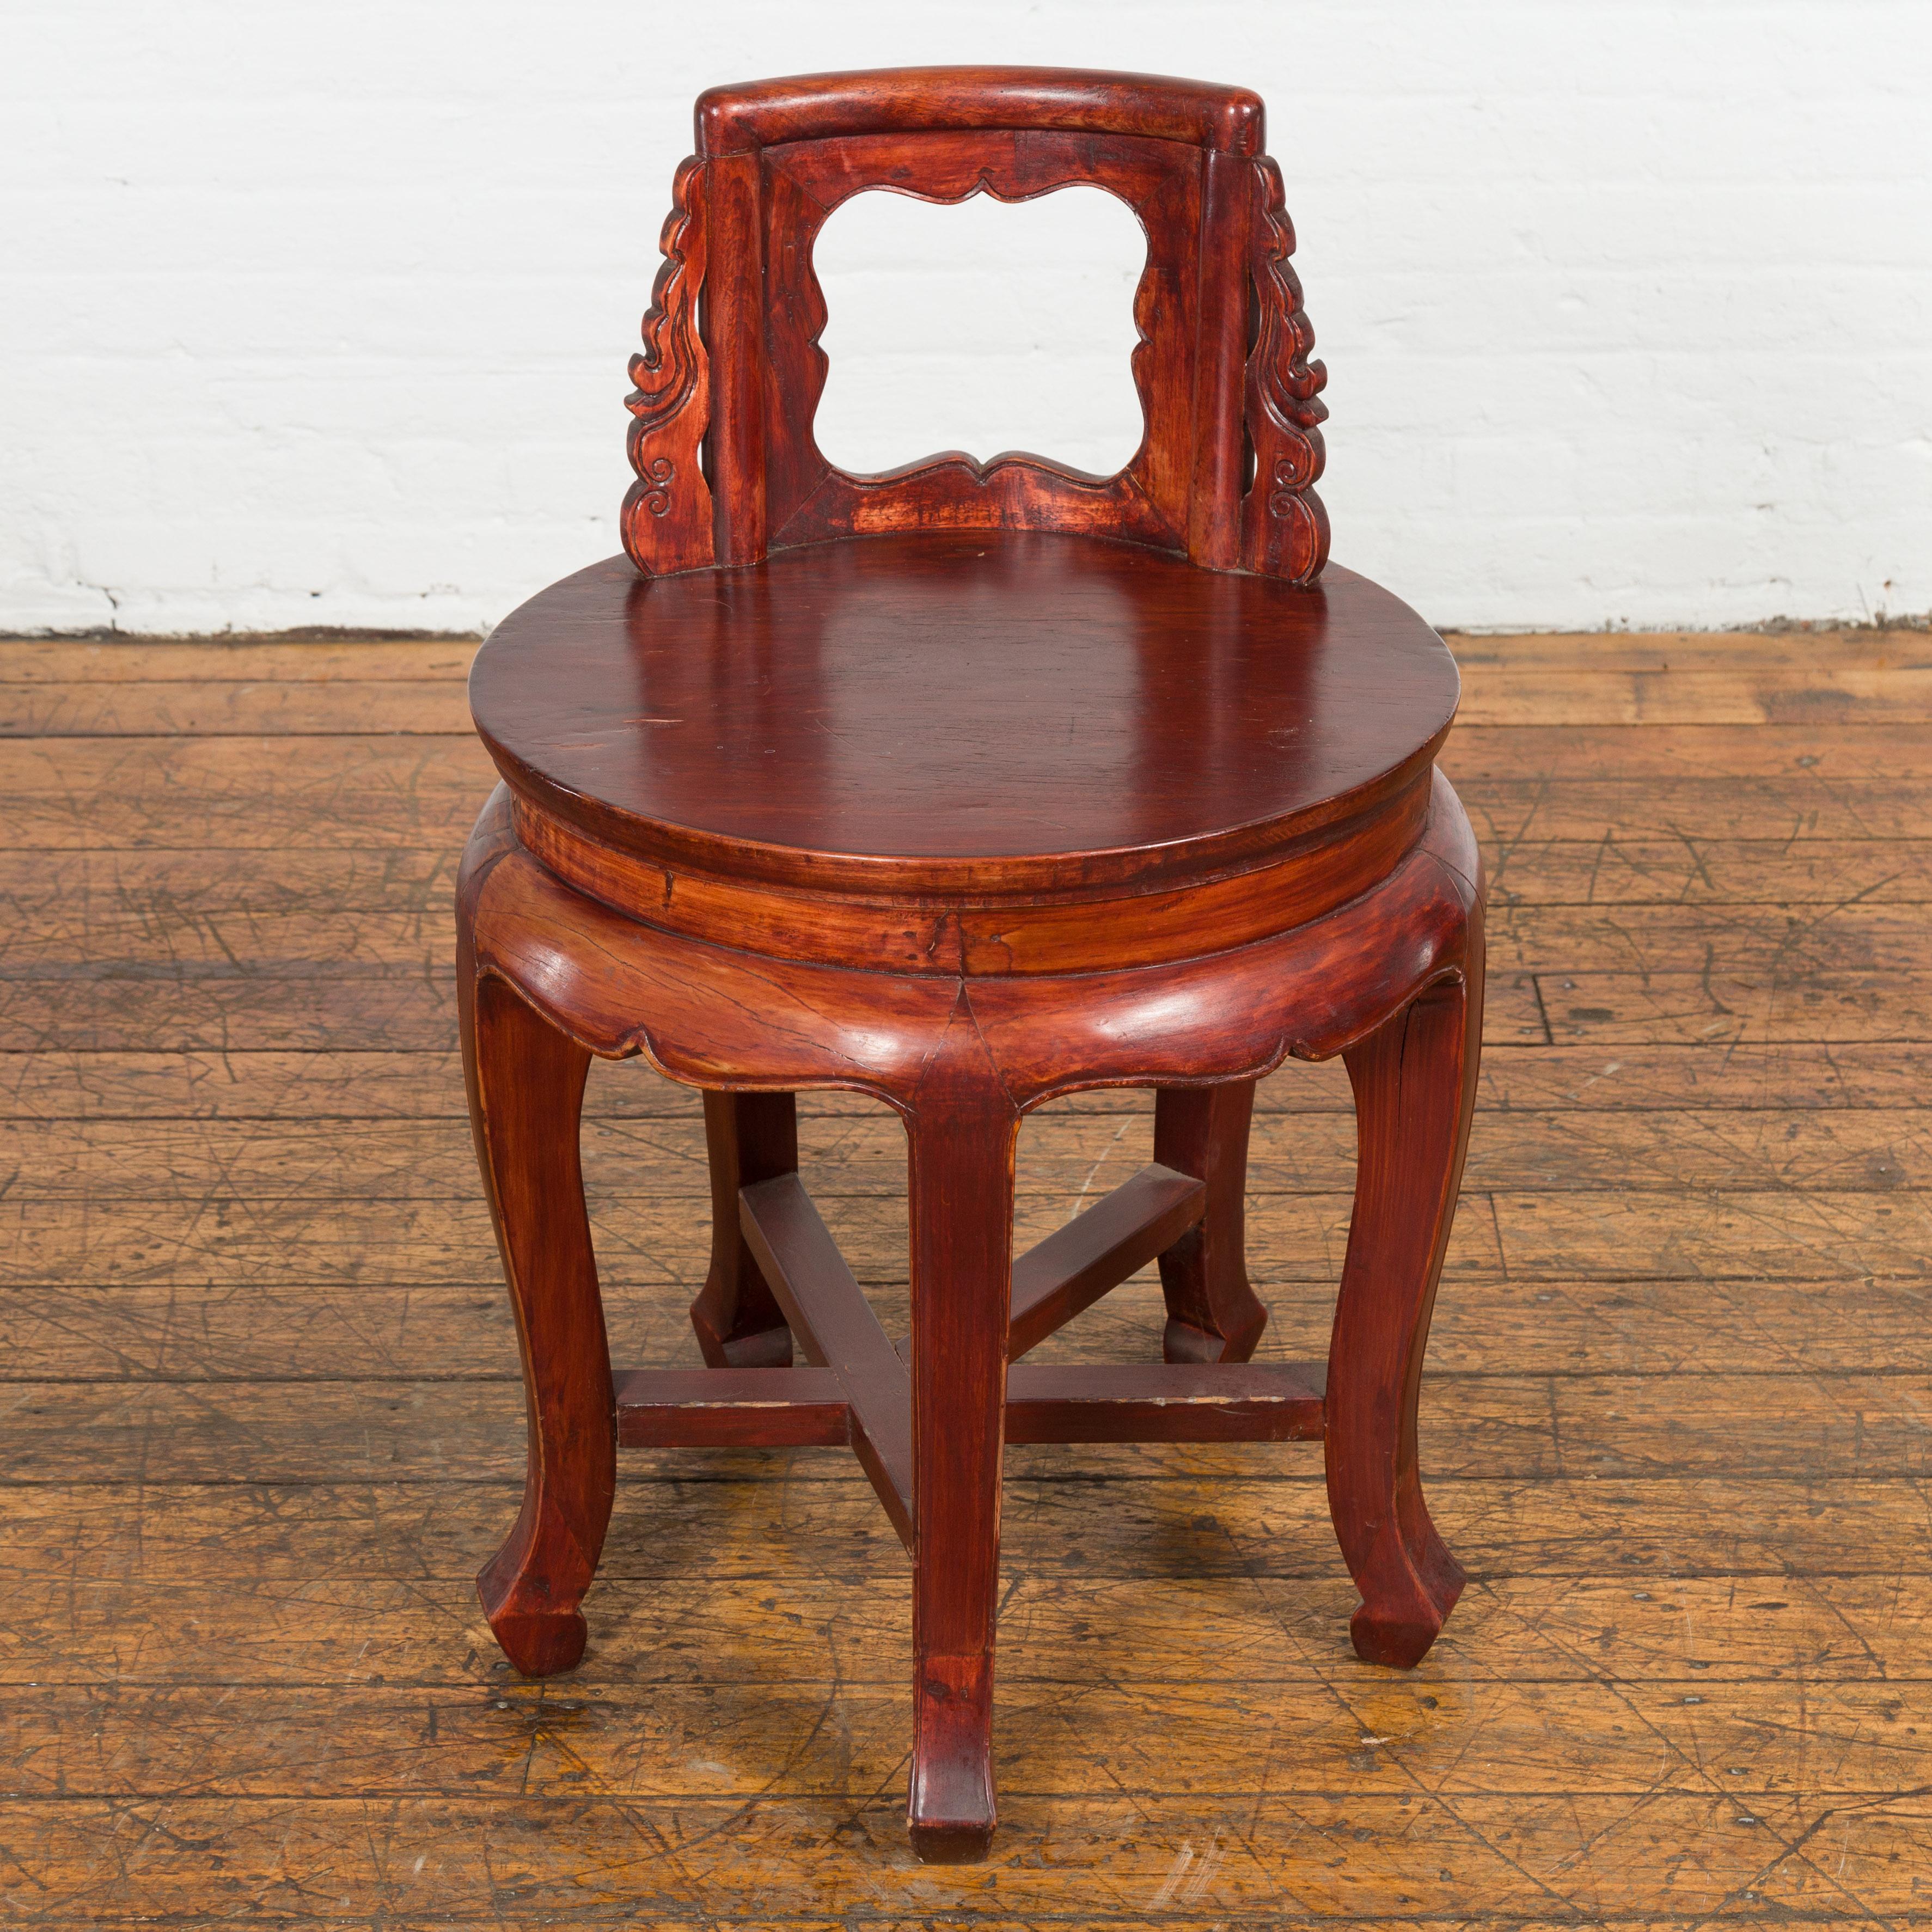 Chinese Late Qing Dynasty Diminutive Chair with Carved Back and Curving Legs In Good Condition For Sale In Yonkers, NY